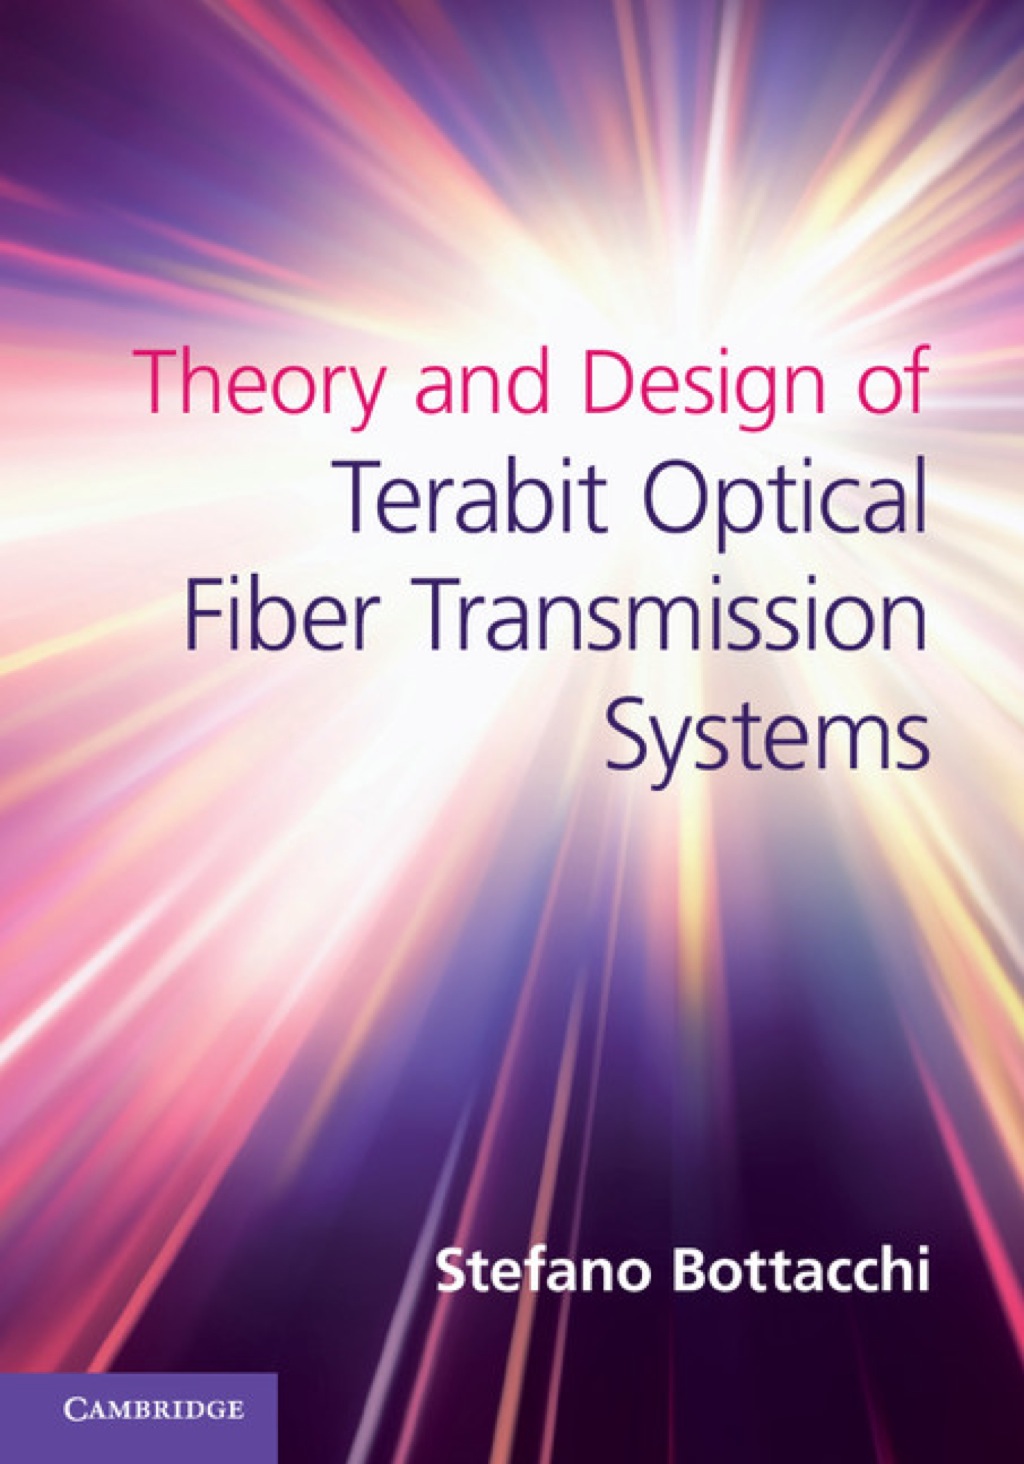 Theory and Design of Terabit Optical Fiber Transmission Systems (eBook) - Stefano Bottacchi,